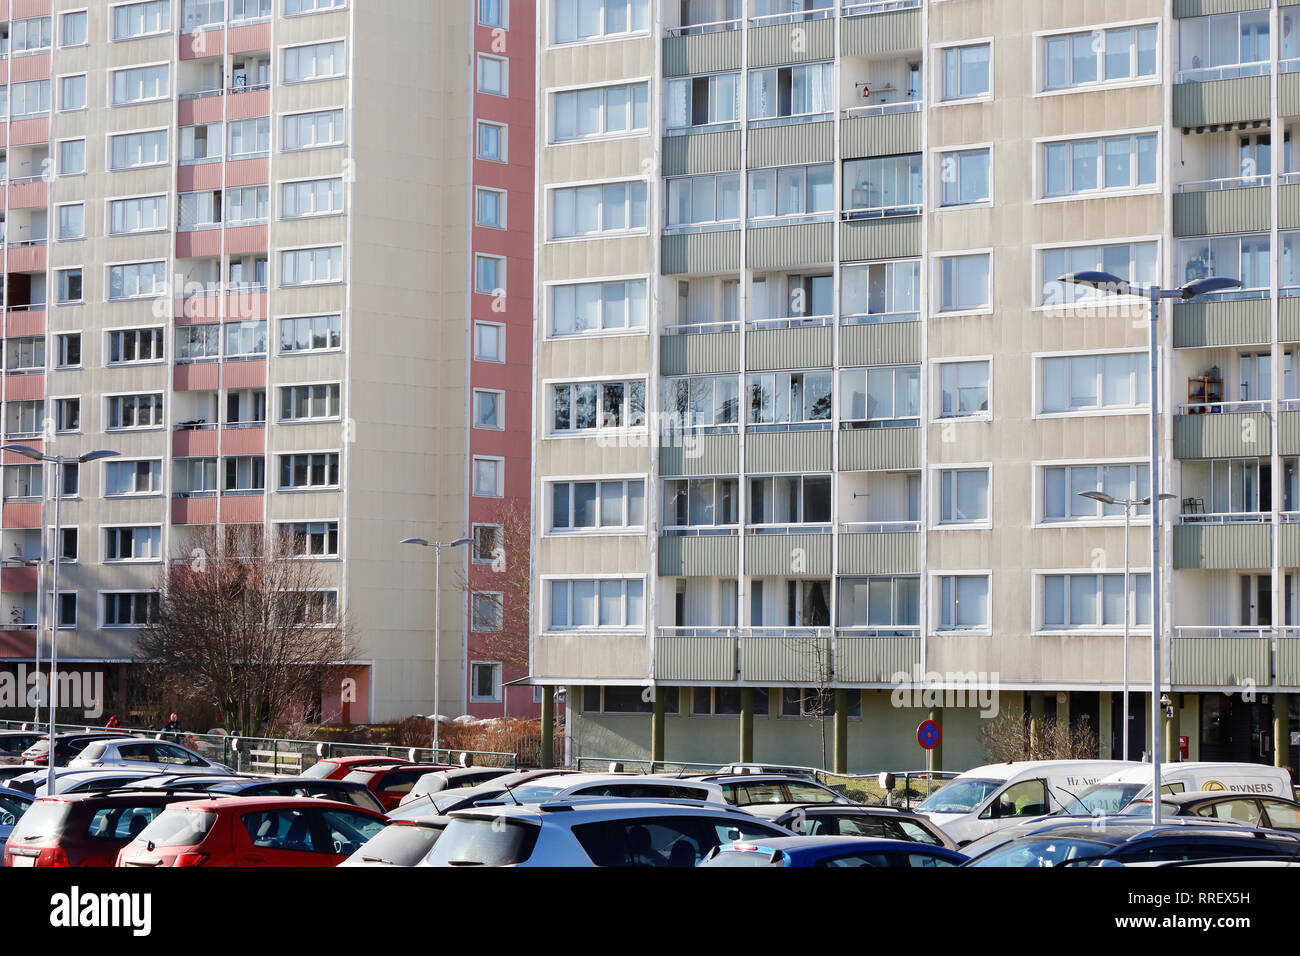 Sodertalje, Sweden - February 24, 2019: Exterior view of multi-family multy-stories apartment buildings 1960s era with parked cars in front in the Bru Stock Photo